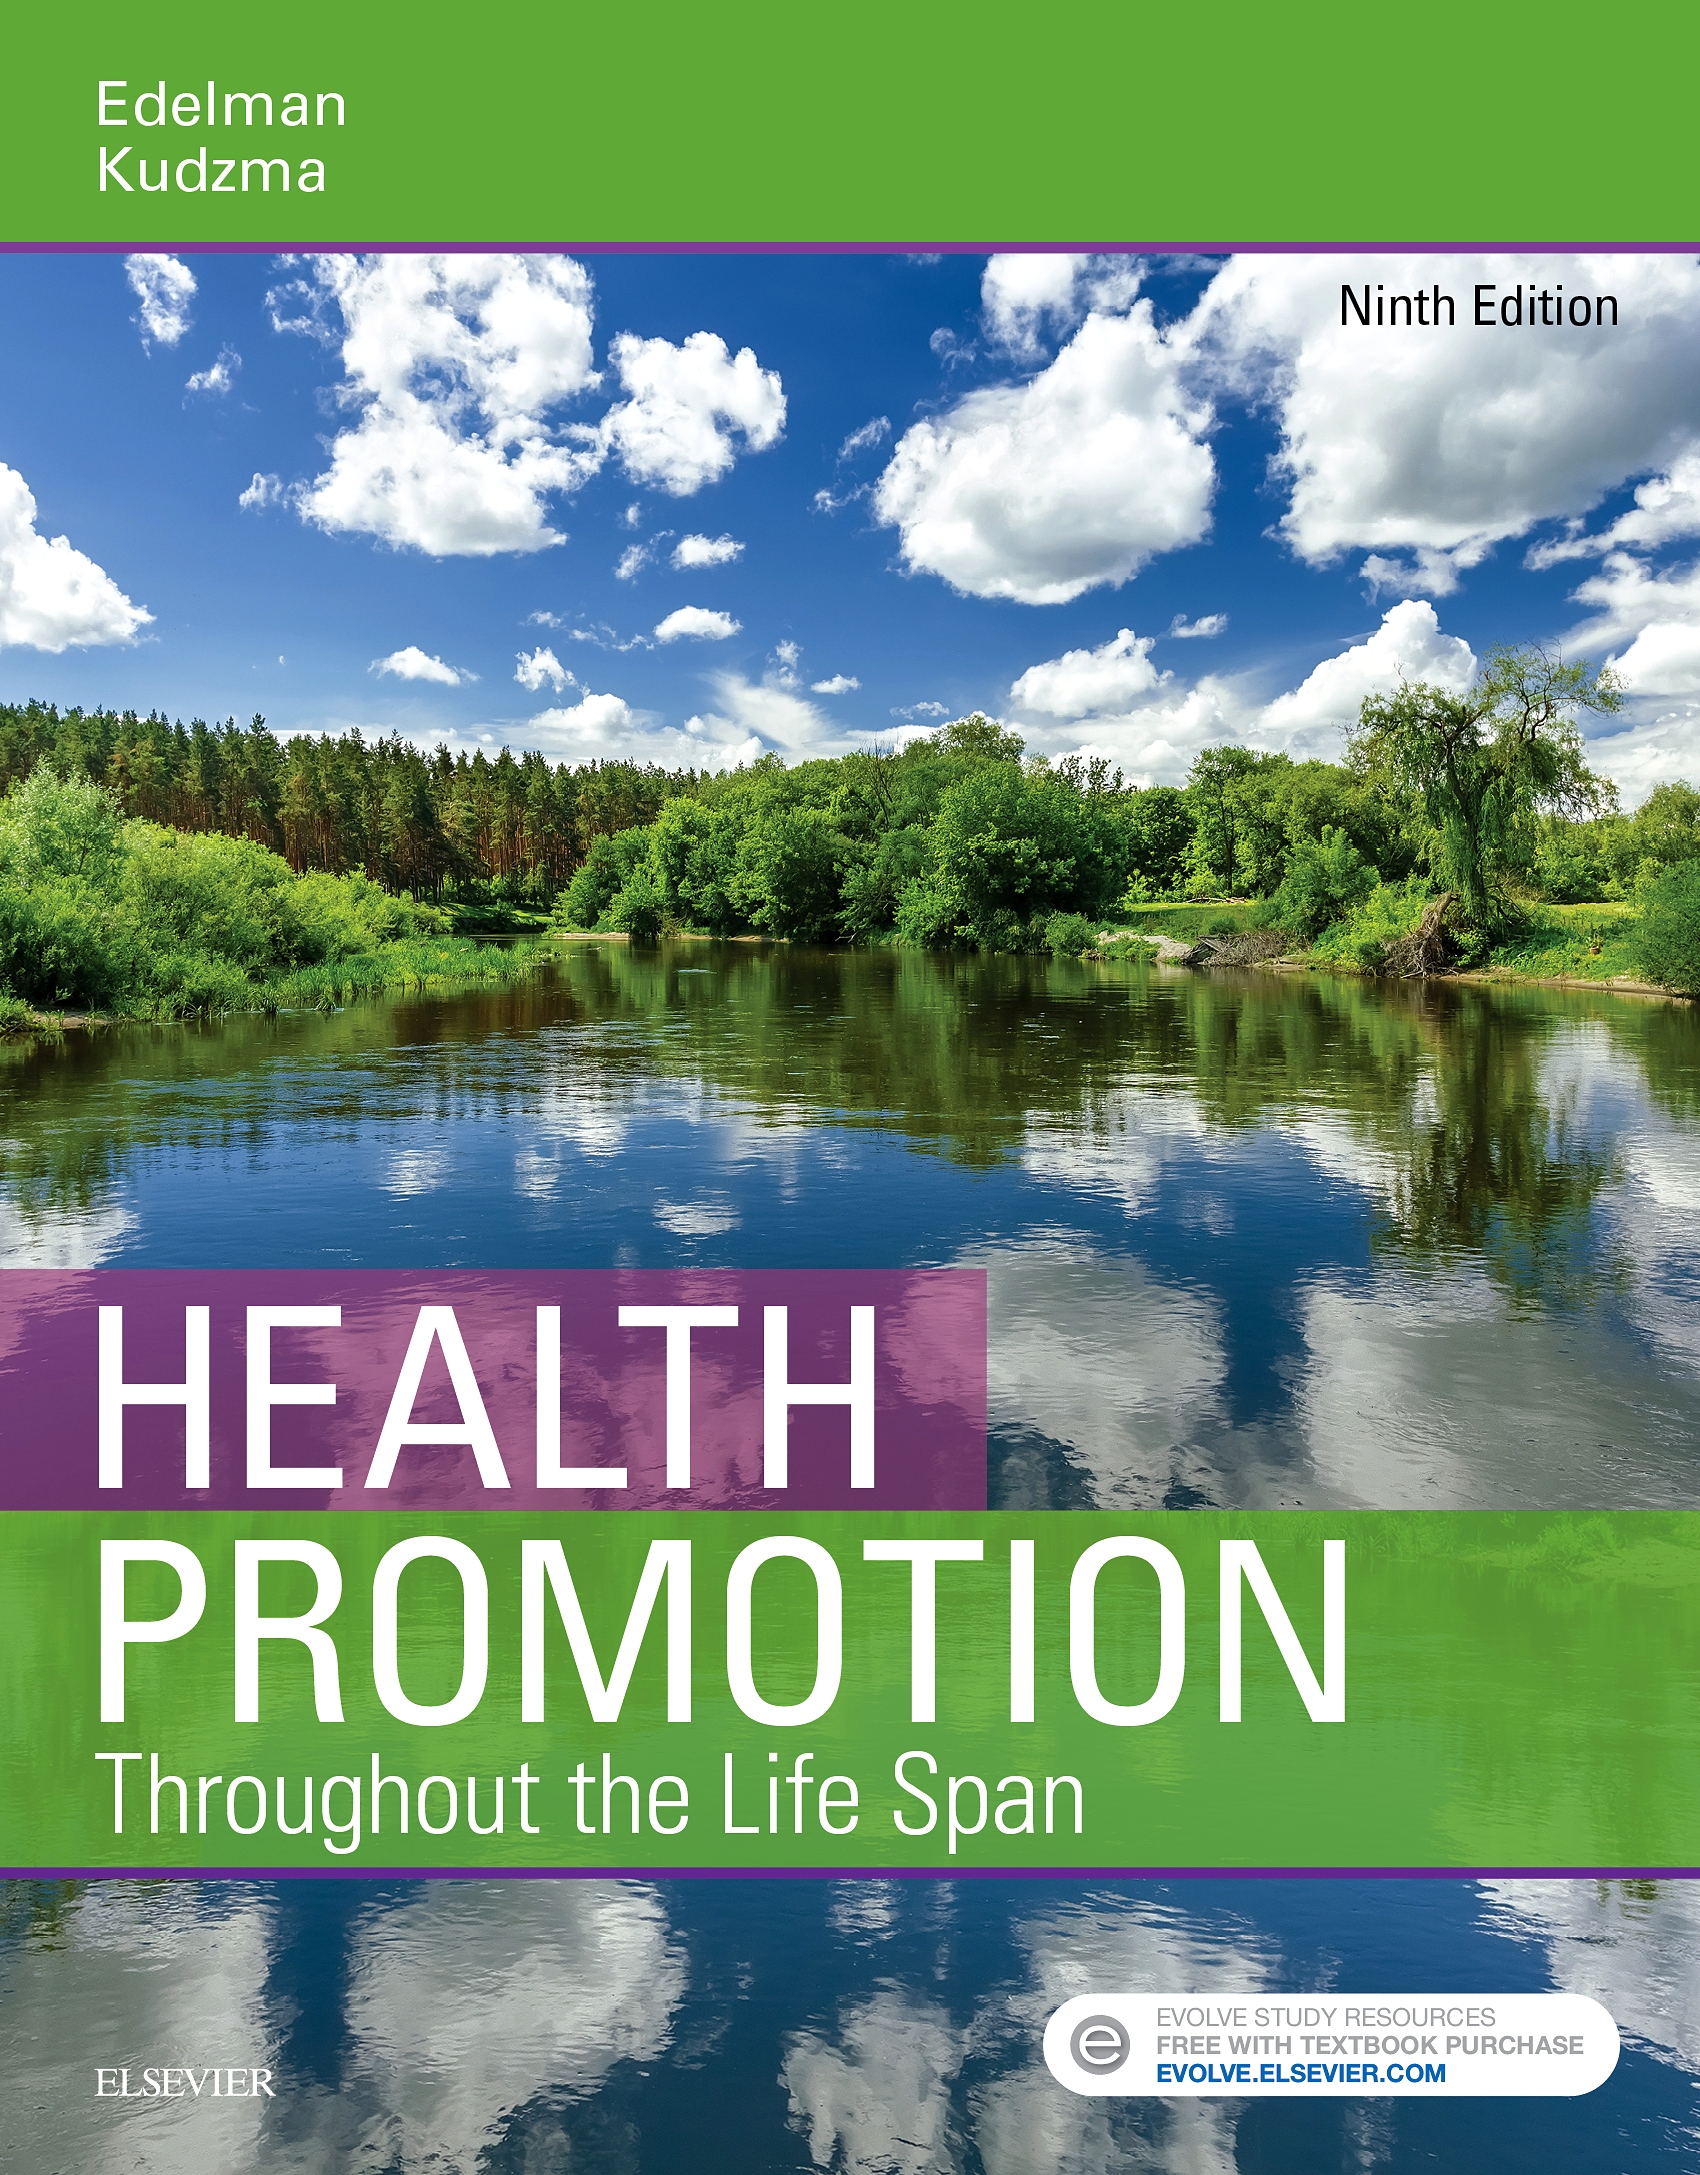 Evolve Resources for Health Promotion Throughout the Life Span, 9th Edition